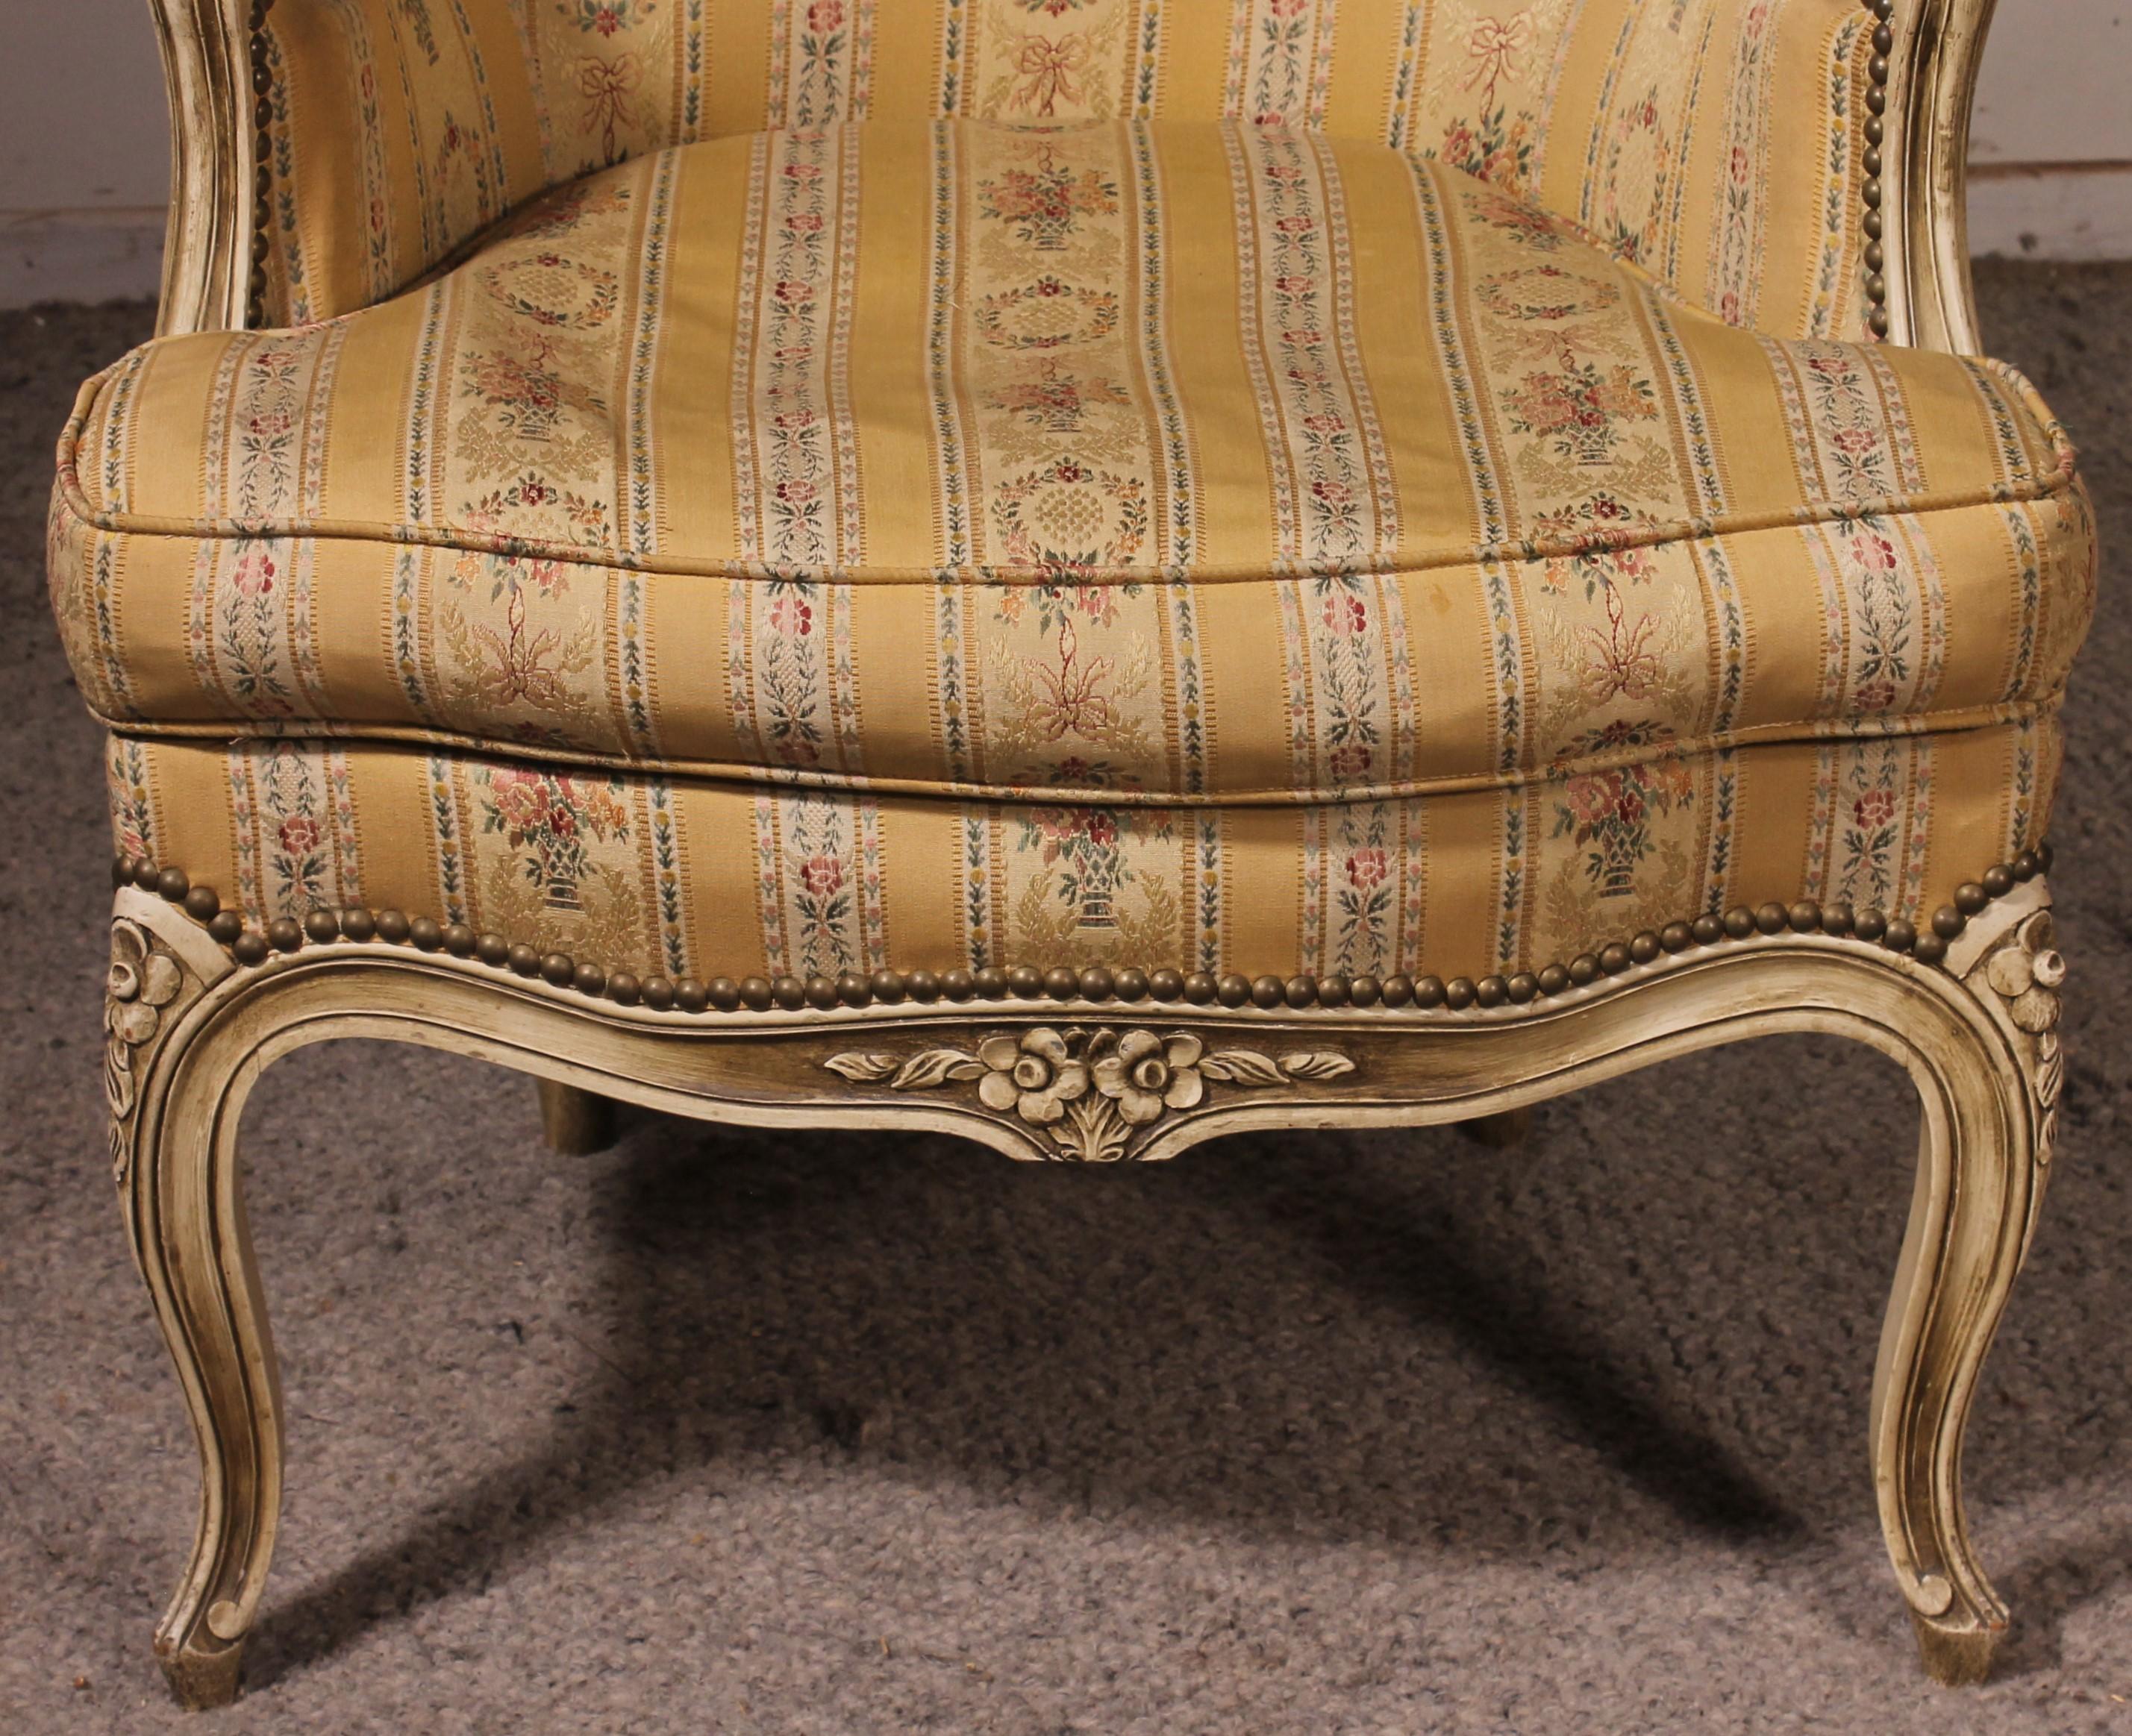 Lovely Louis XV style painted wooden armchair upholstered with a very beautiful fabric
Beautiful quality of sculpture
seat height 42cm
In superb condition.
Note: slight little wear on the armrests, but really minimal